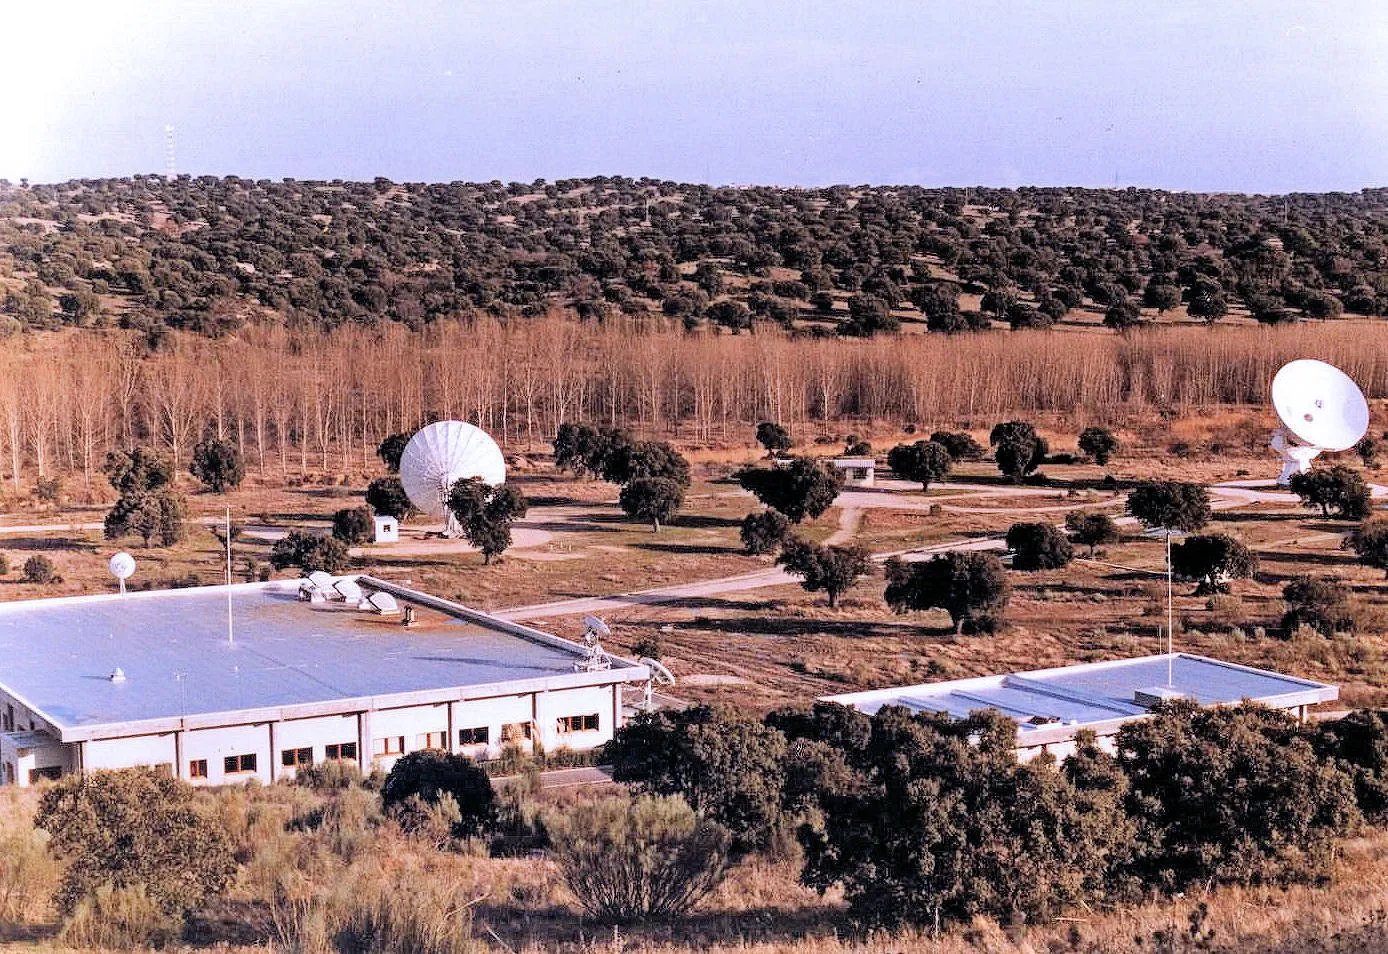 Photo showing: On 19 May 1975, a ground station at Villafranca del Castillo, Spain, built for the International Ultraviolet Explorer satellite, was assigned to ESRO to support future ESA missions. This photo take ca. 1977-1979.
Full details via www.esa.int/40yrs_estrack